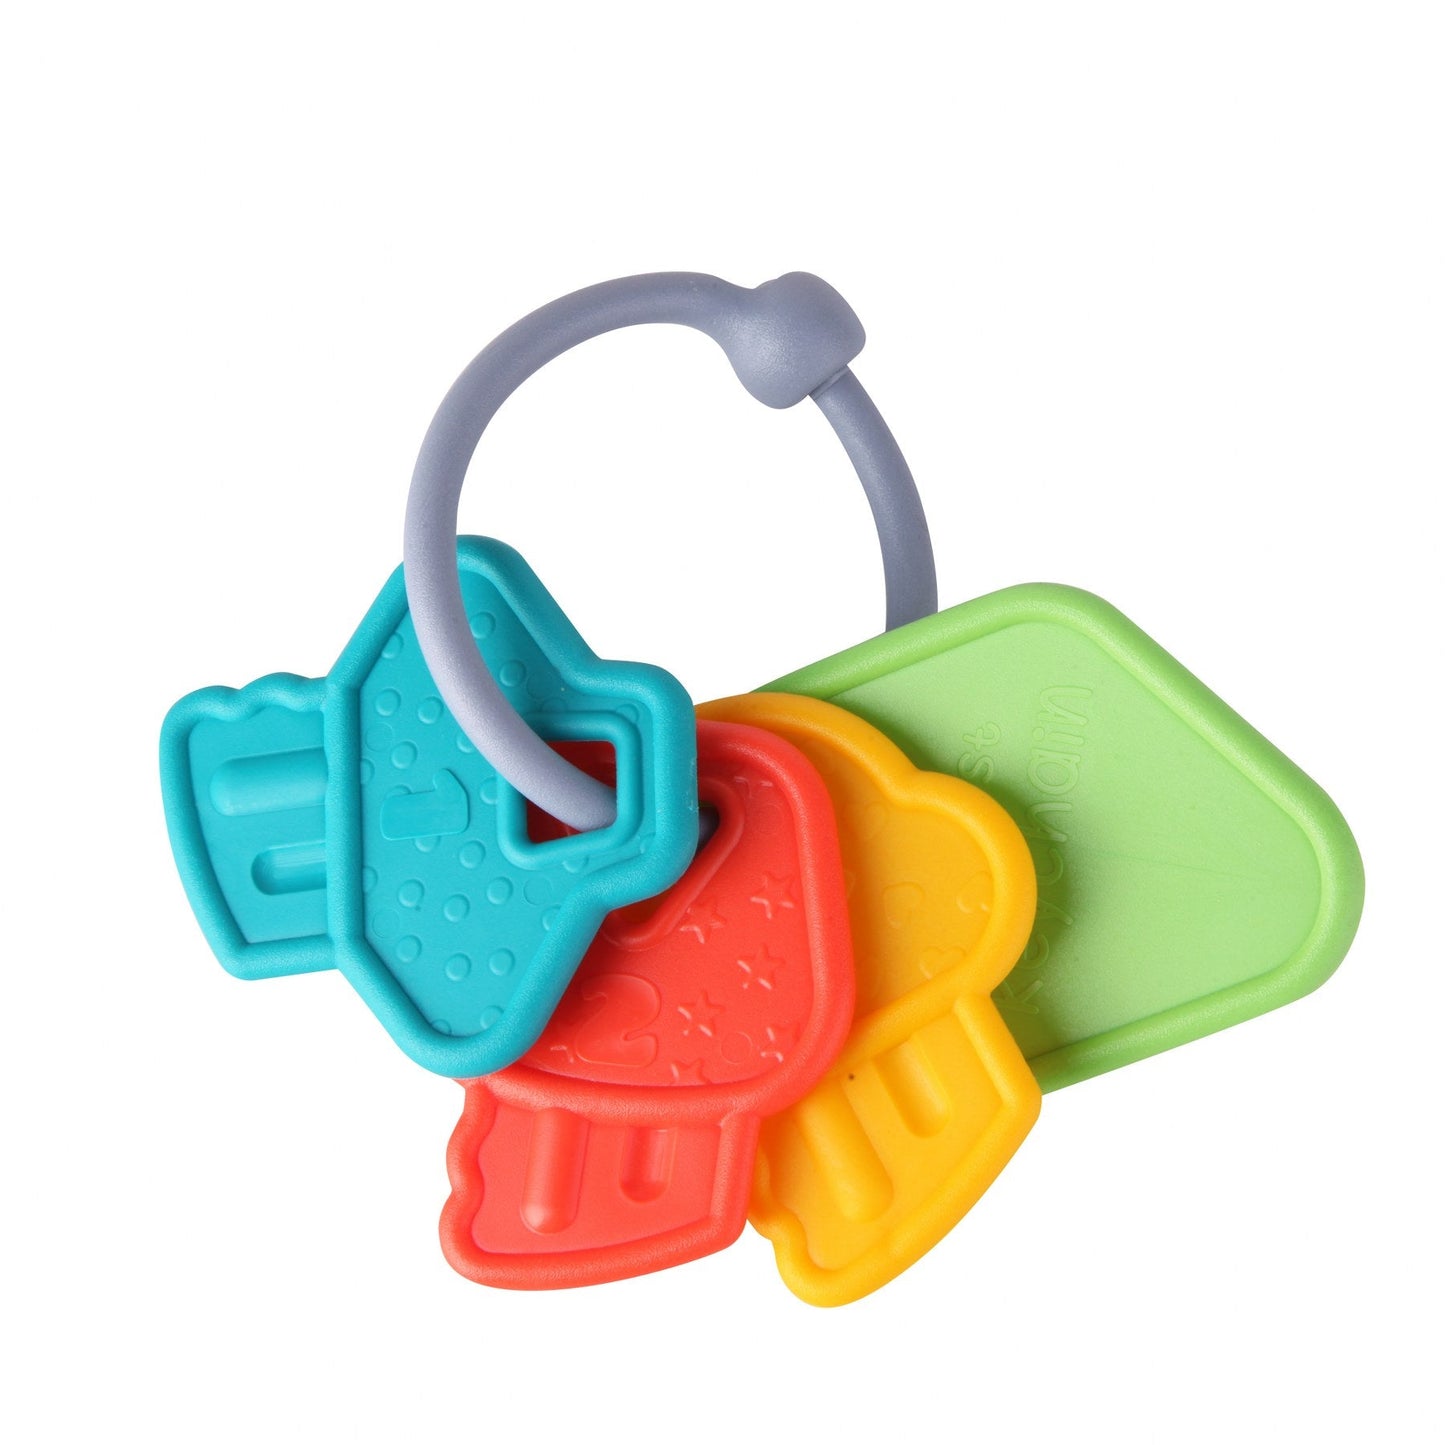 Let's Be Child - My First Keychain Teether